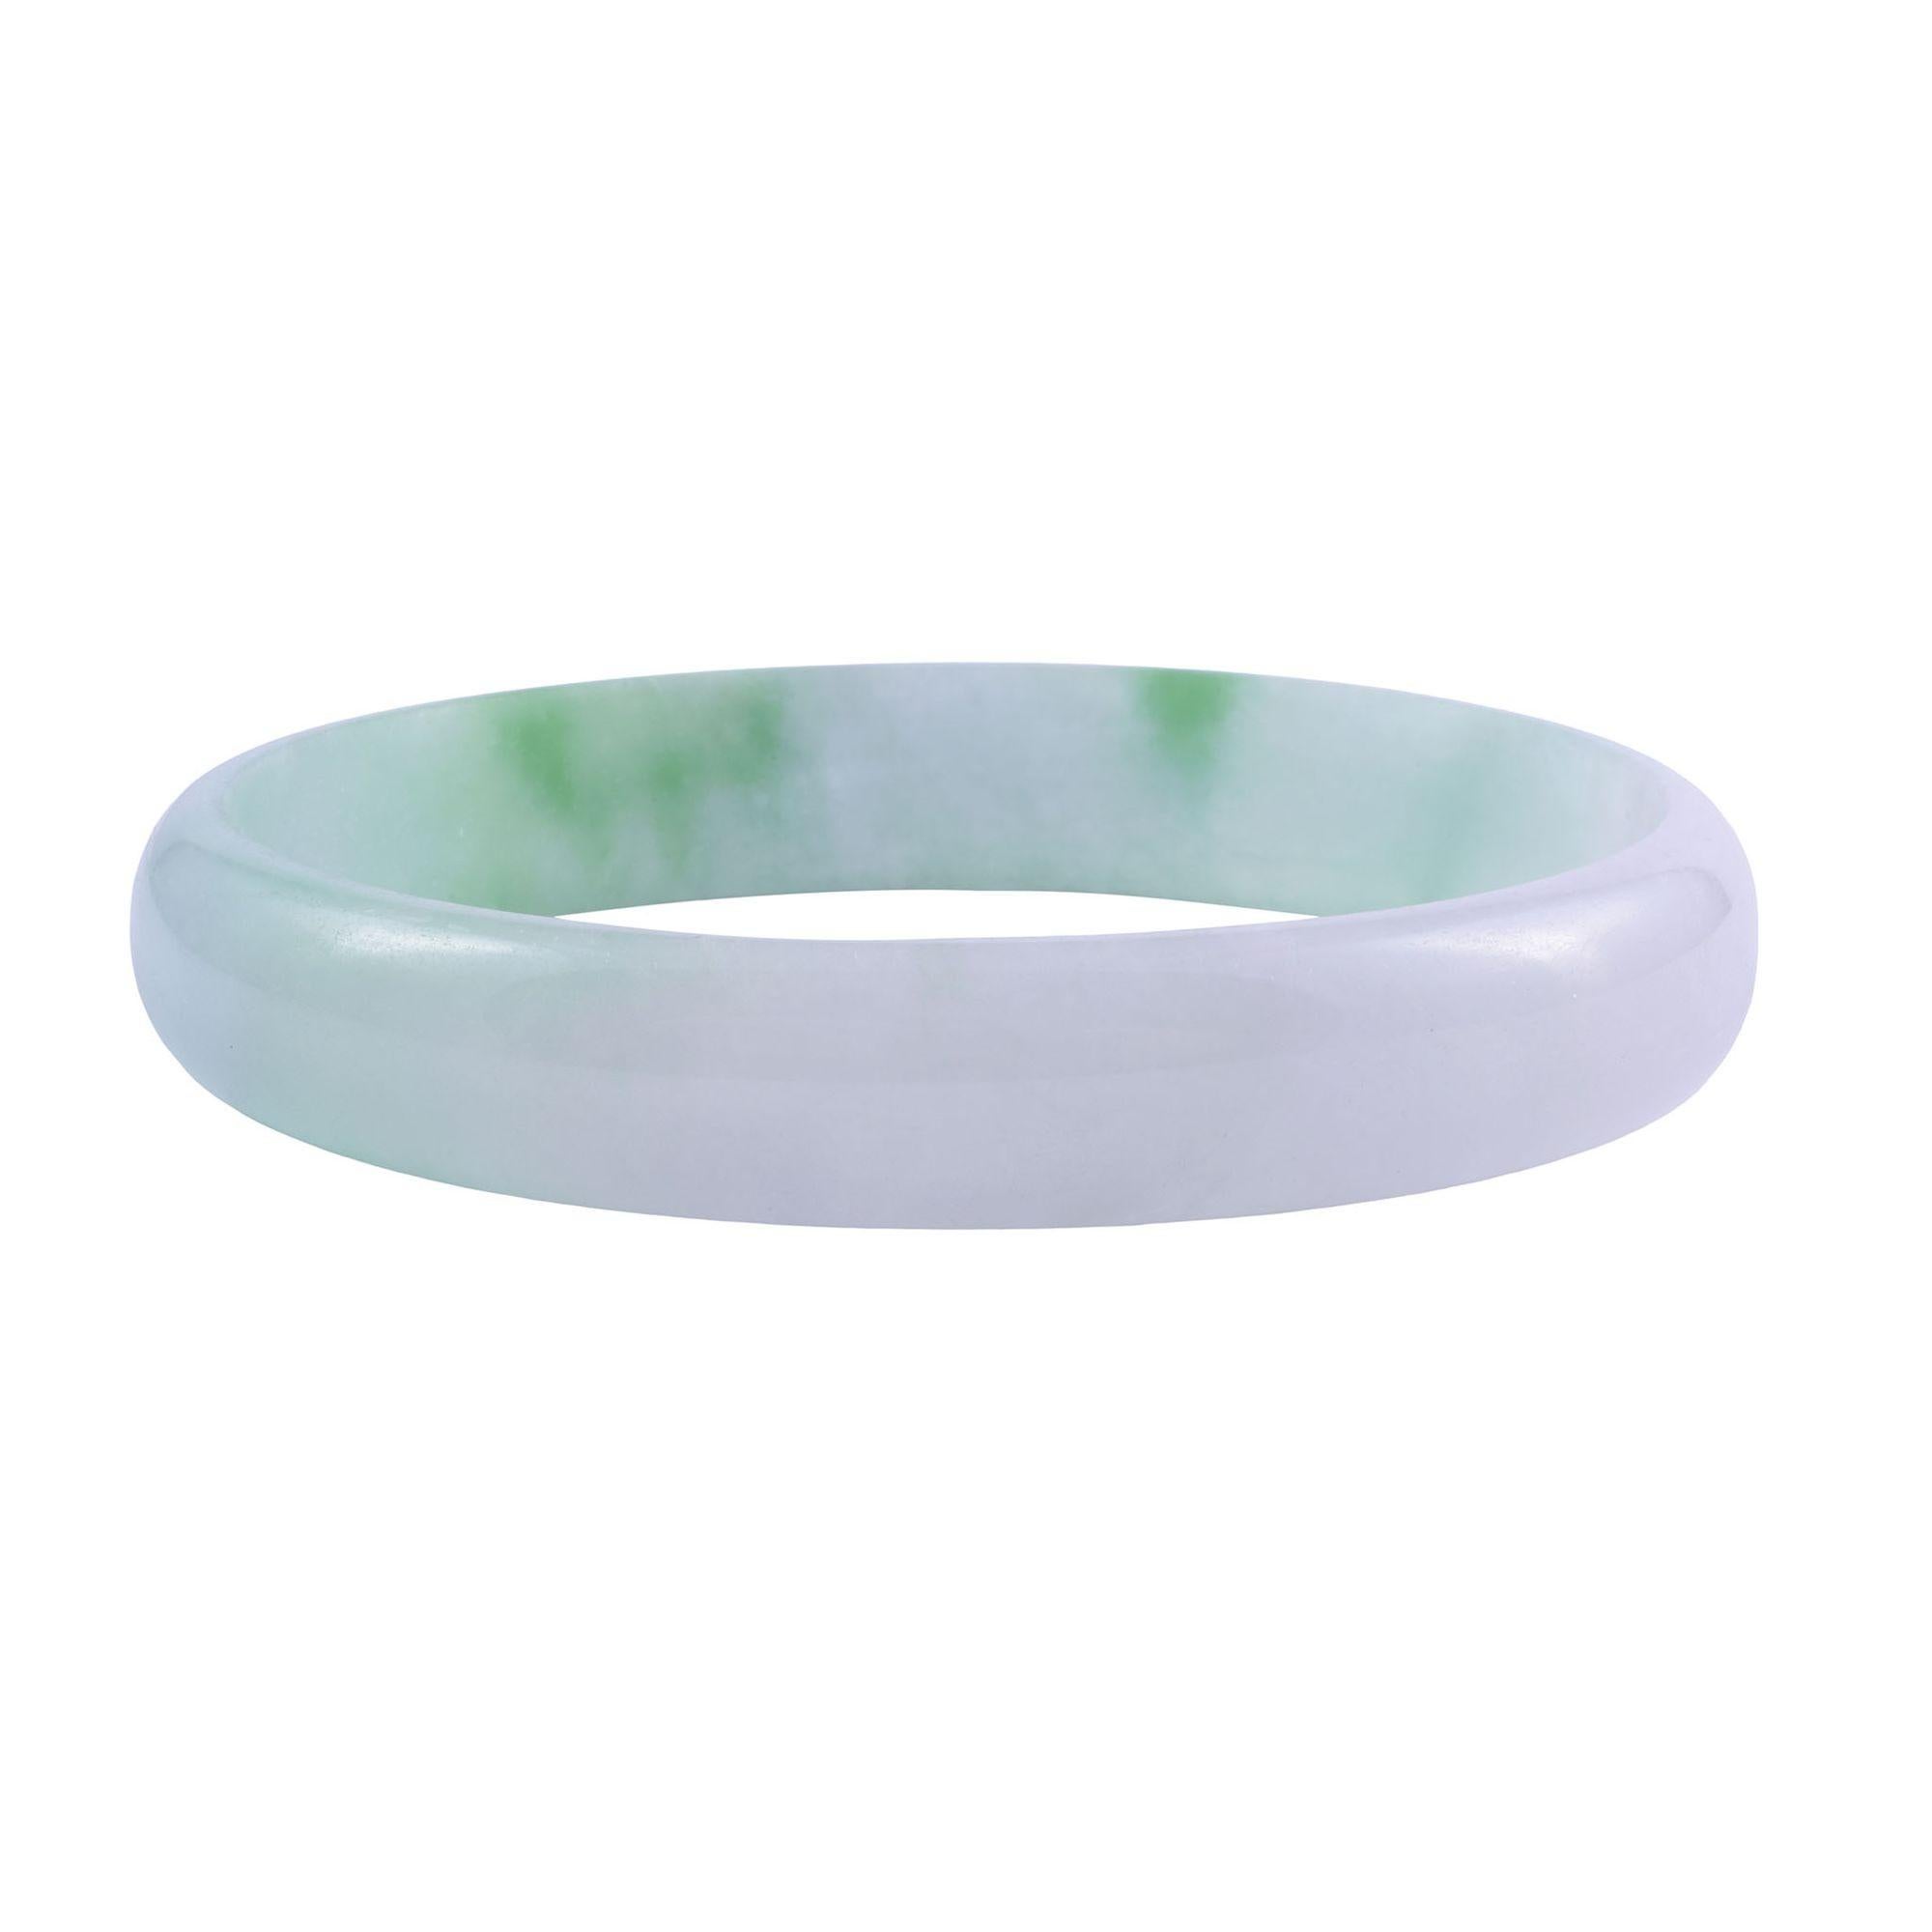 Vintage natural jade bangle bracelet, circa 1960-70. This bangle style bracelet is carved from a solid piece of jade. [MICO A106416 P]
 
Dimensions
6.25″ internal circumference; 60.6mm diameter; 4.7mm W x 9.5mm D